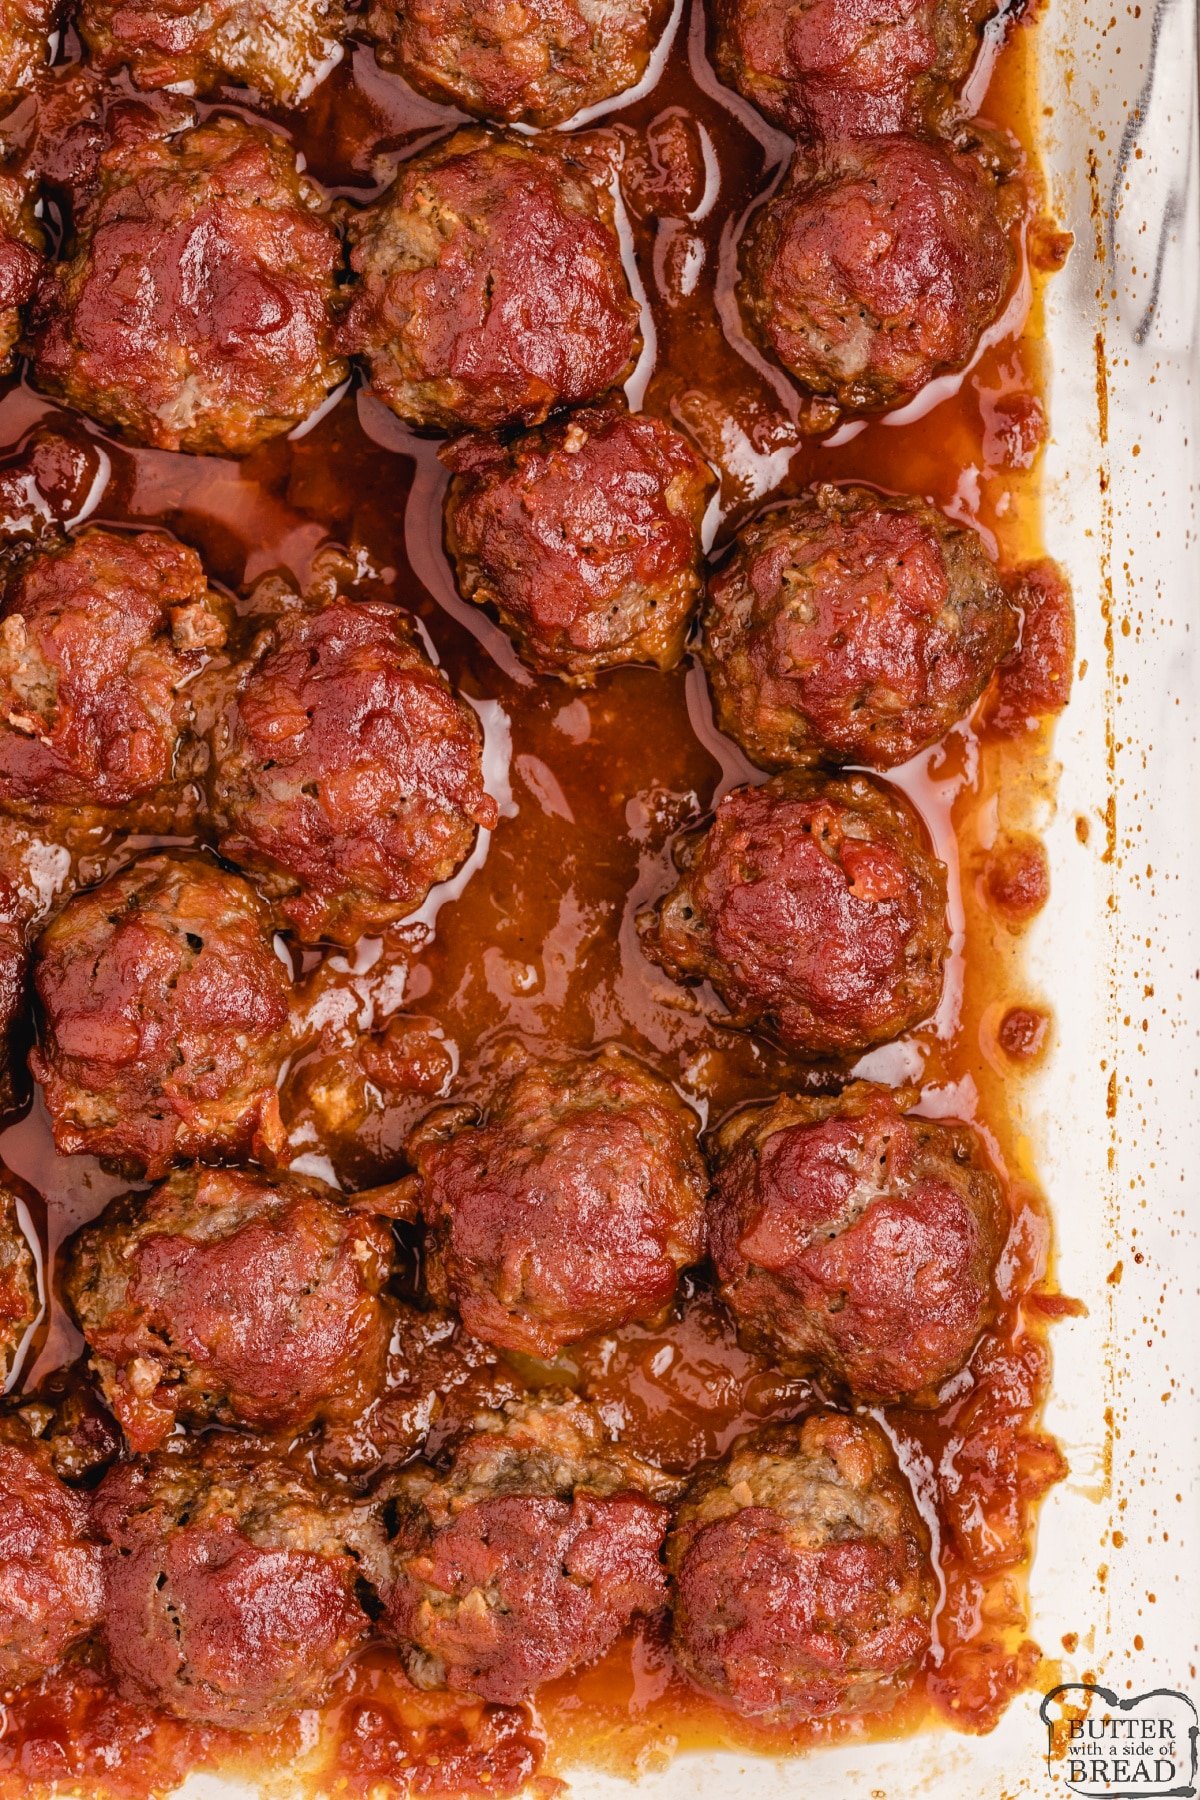 Meatballs with homemade barbecue sauce